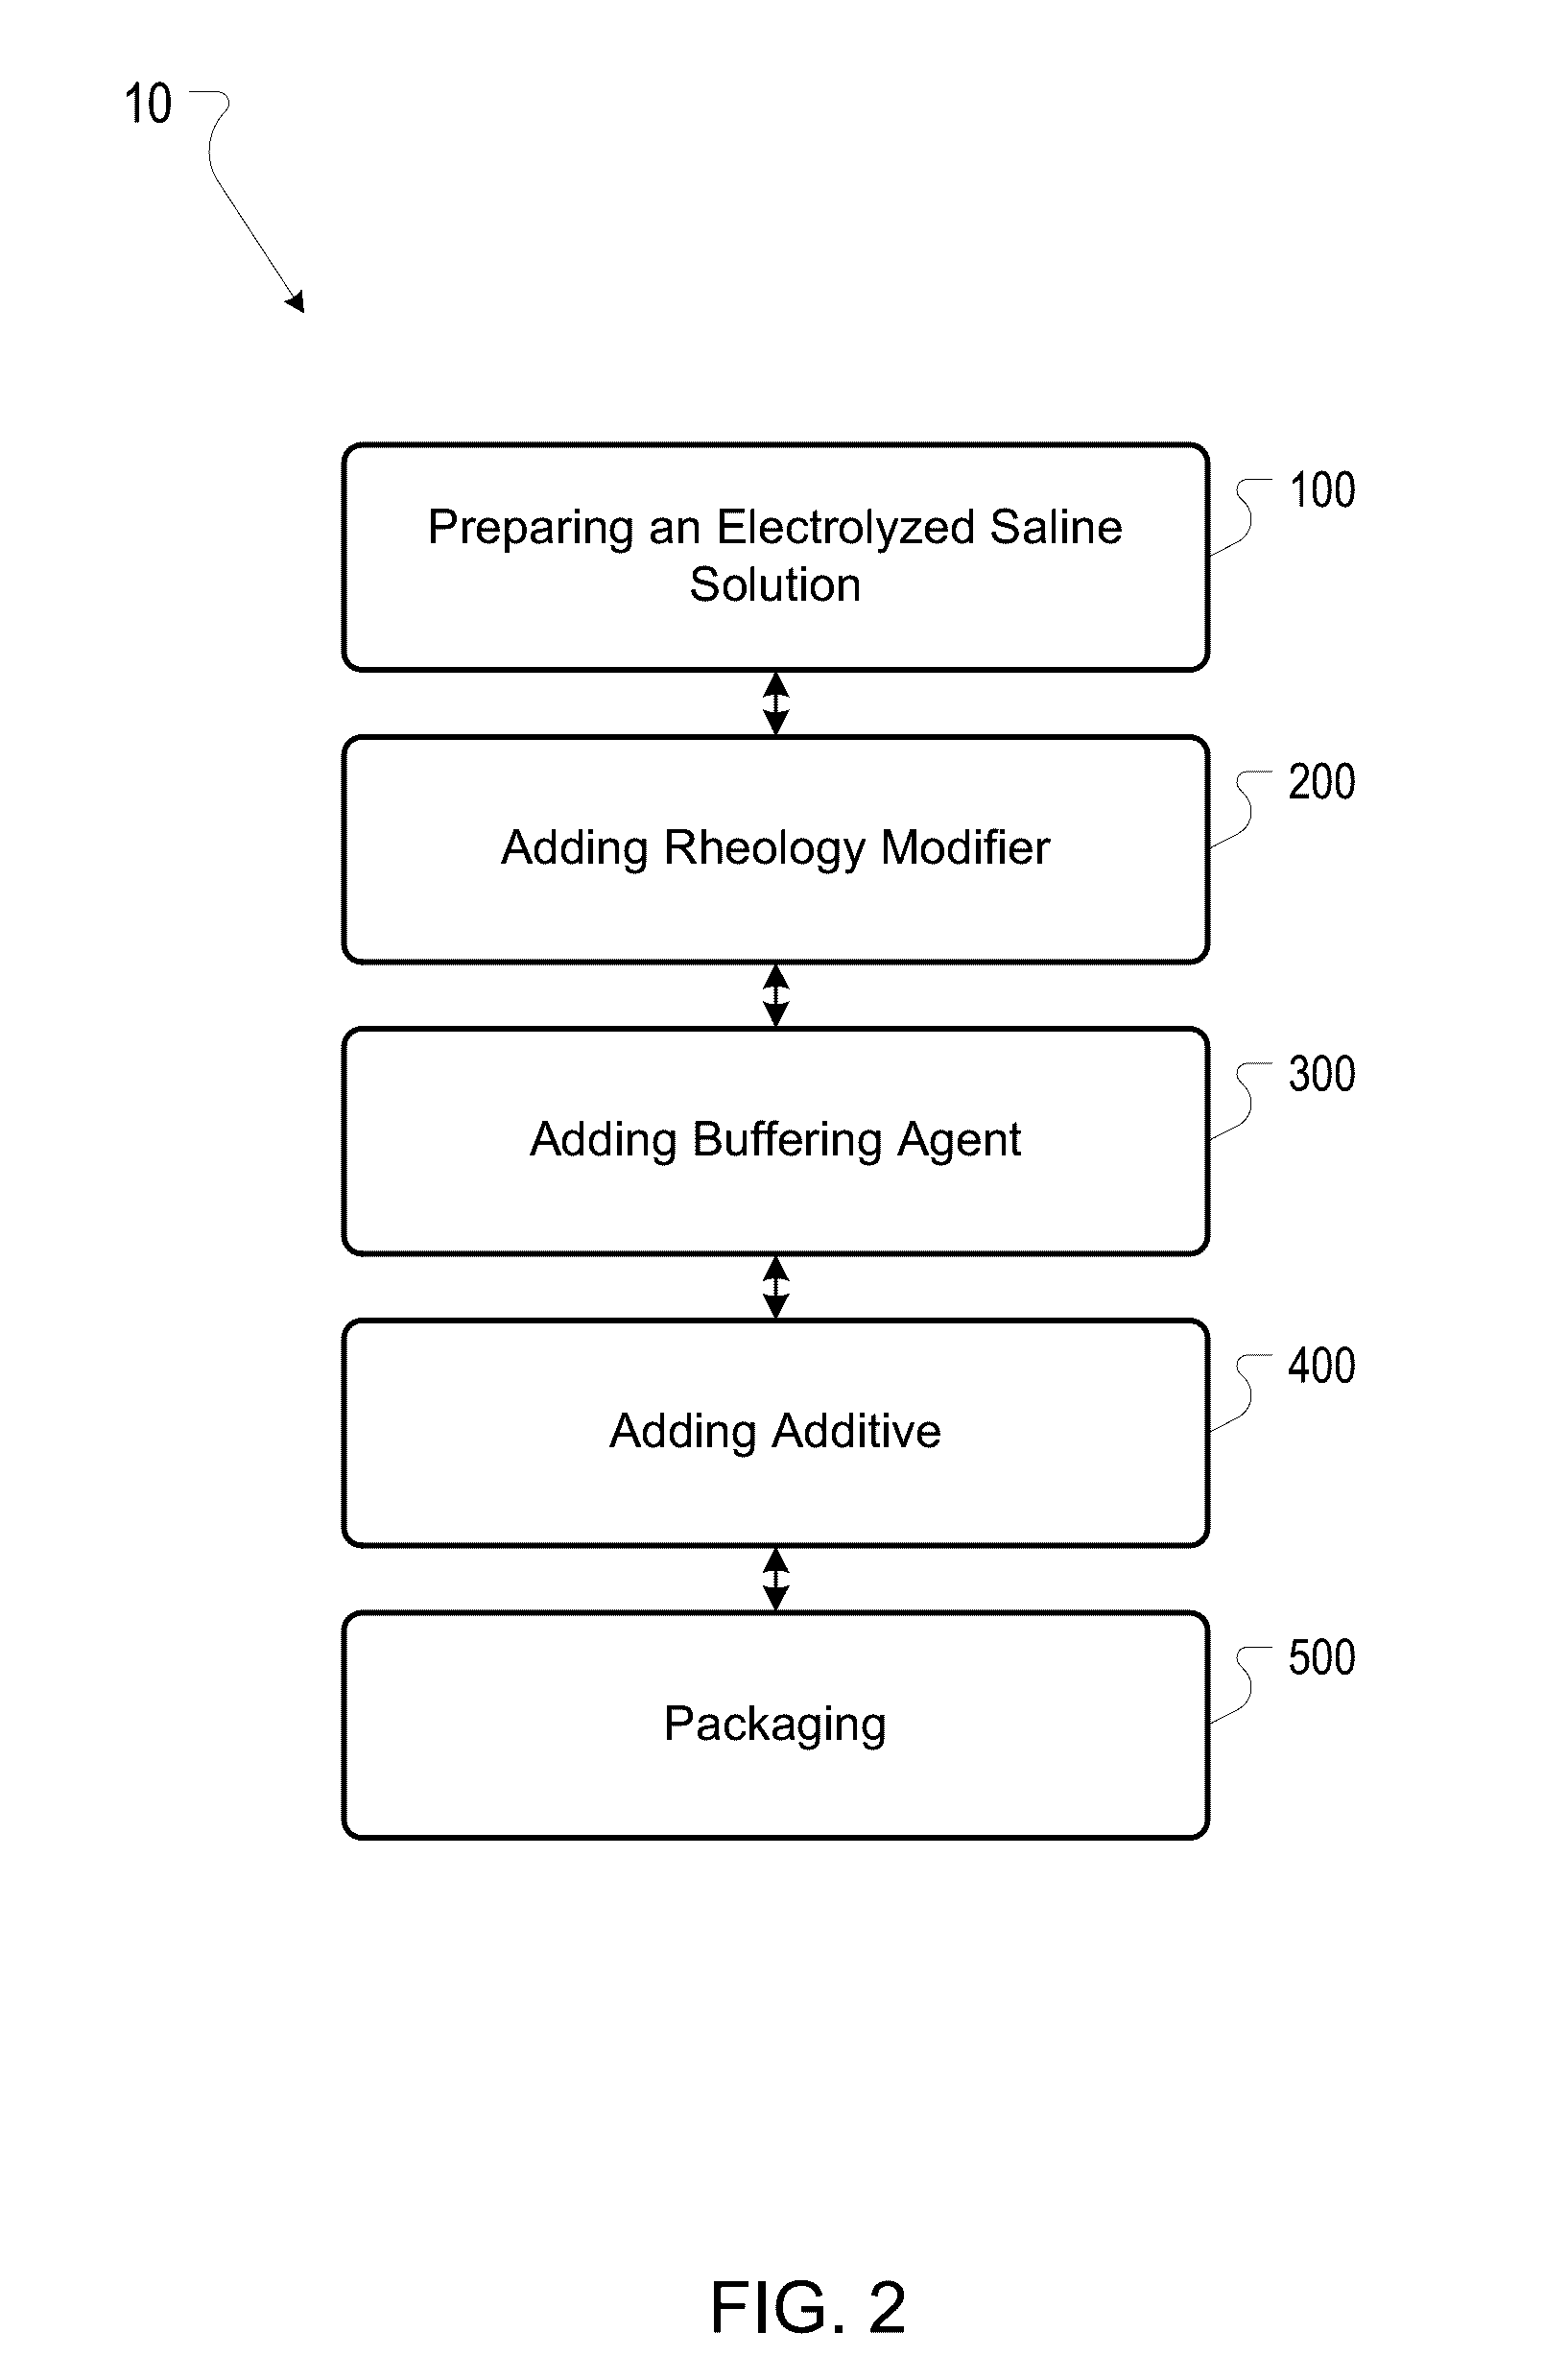 Electrolyzed saline redox-balanced compositions and methods for treating skin conditions